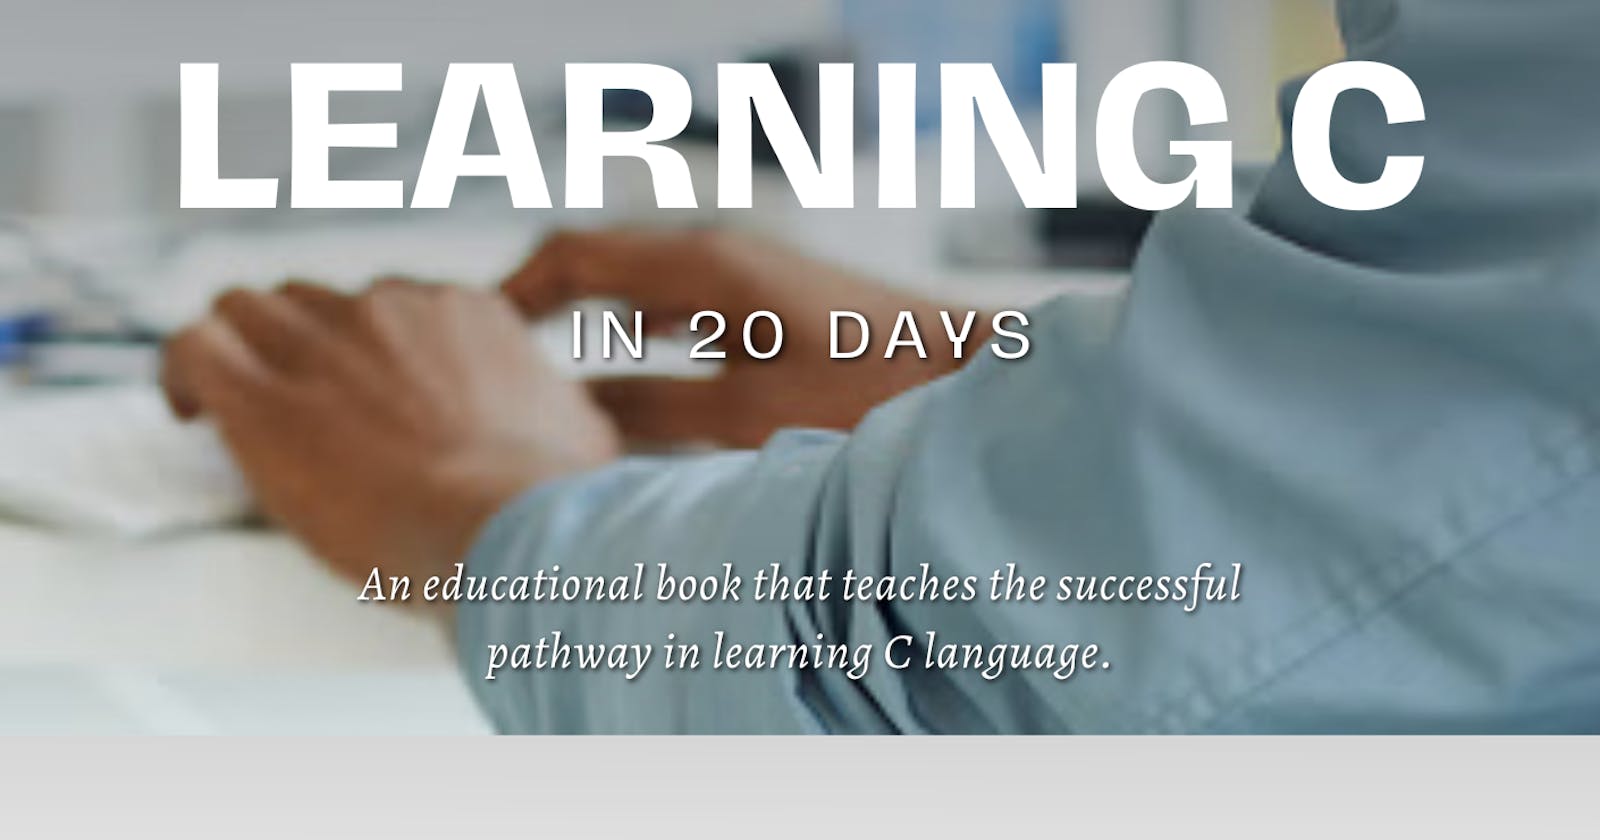 Learning the C Language in 20 days